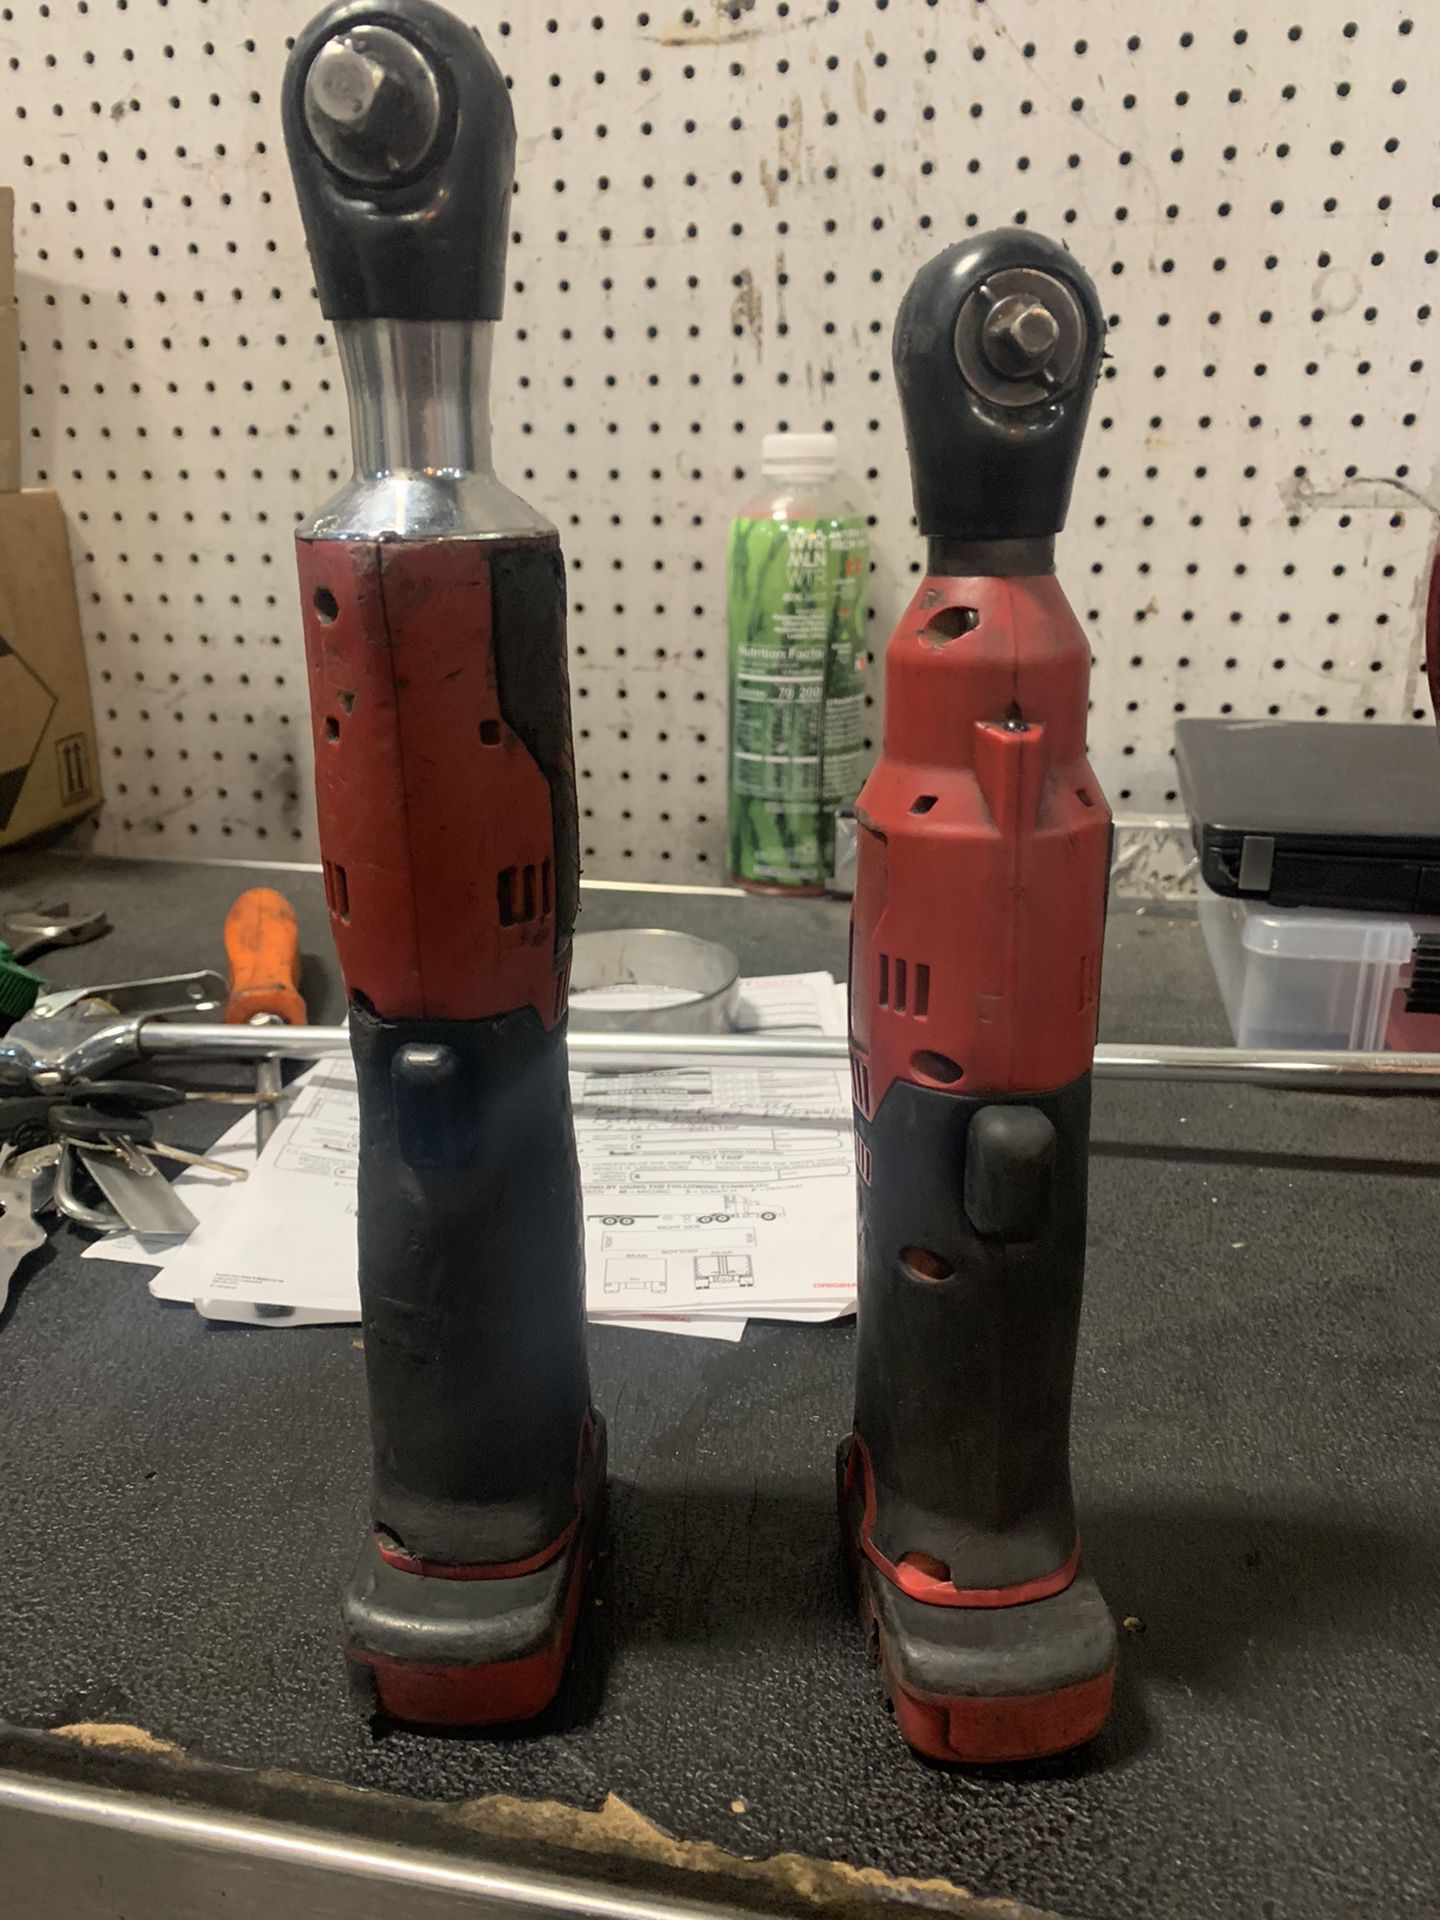 SNAPON CORDLESS DRILLS 3/8 and 1/4